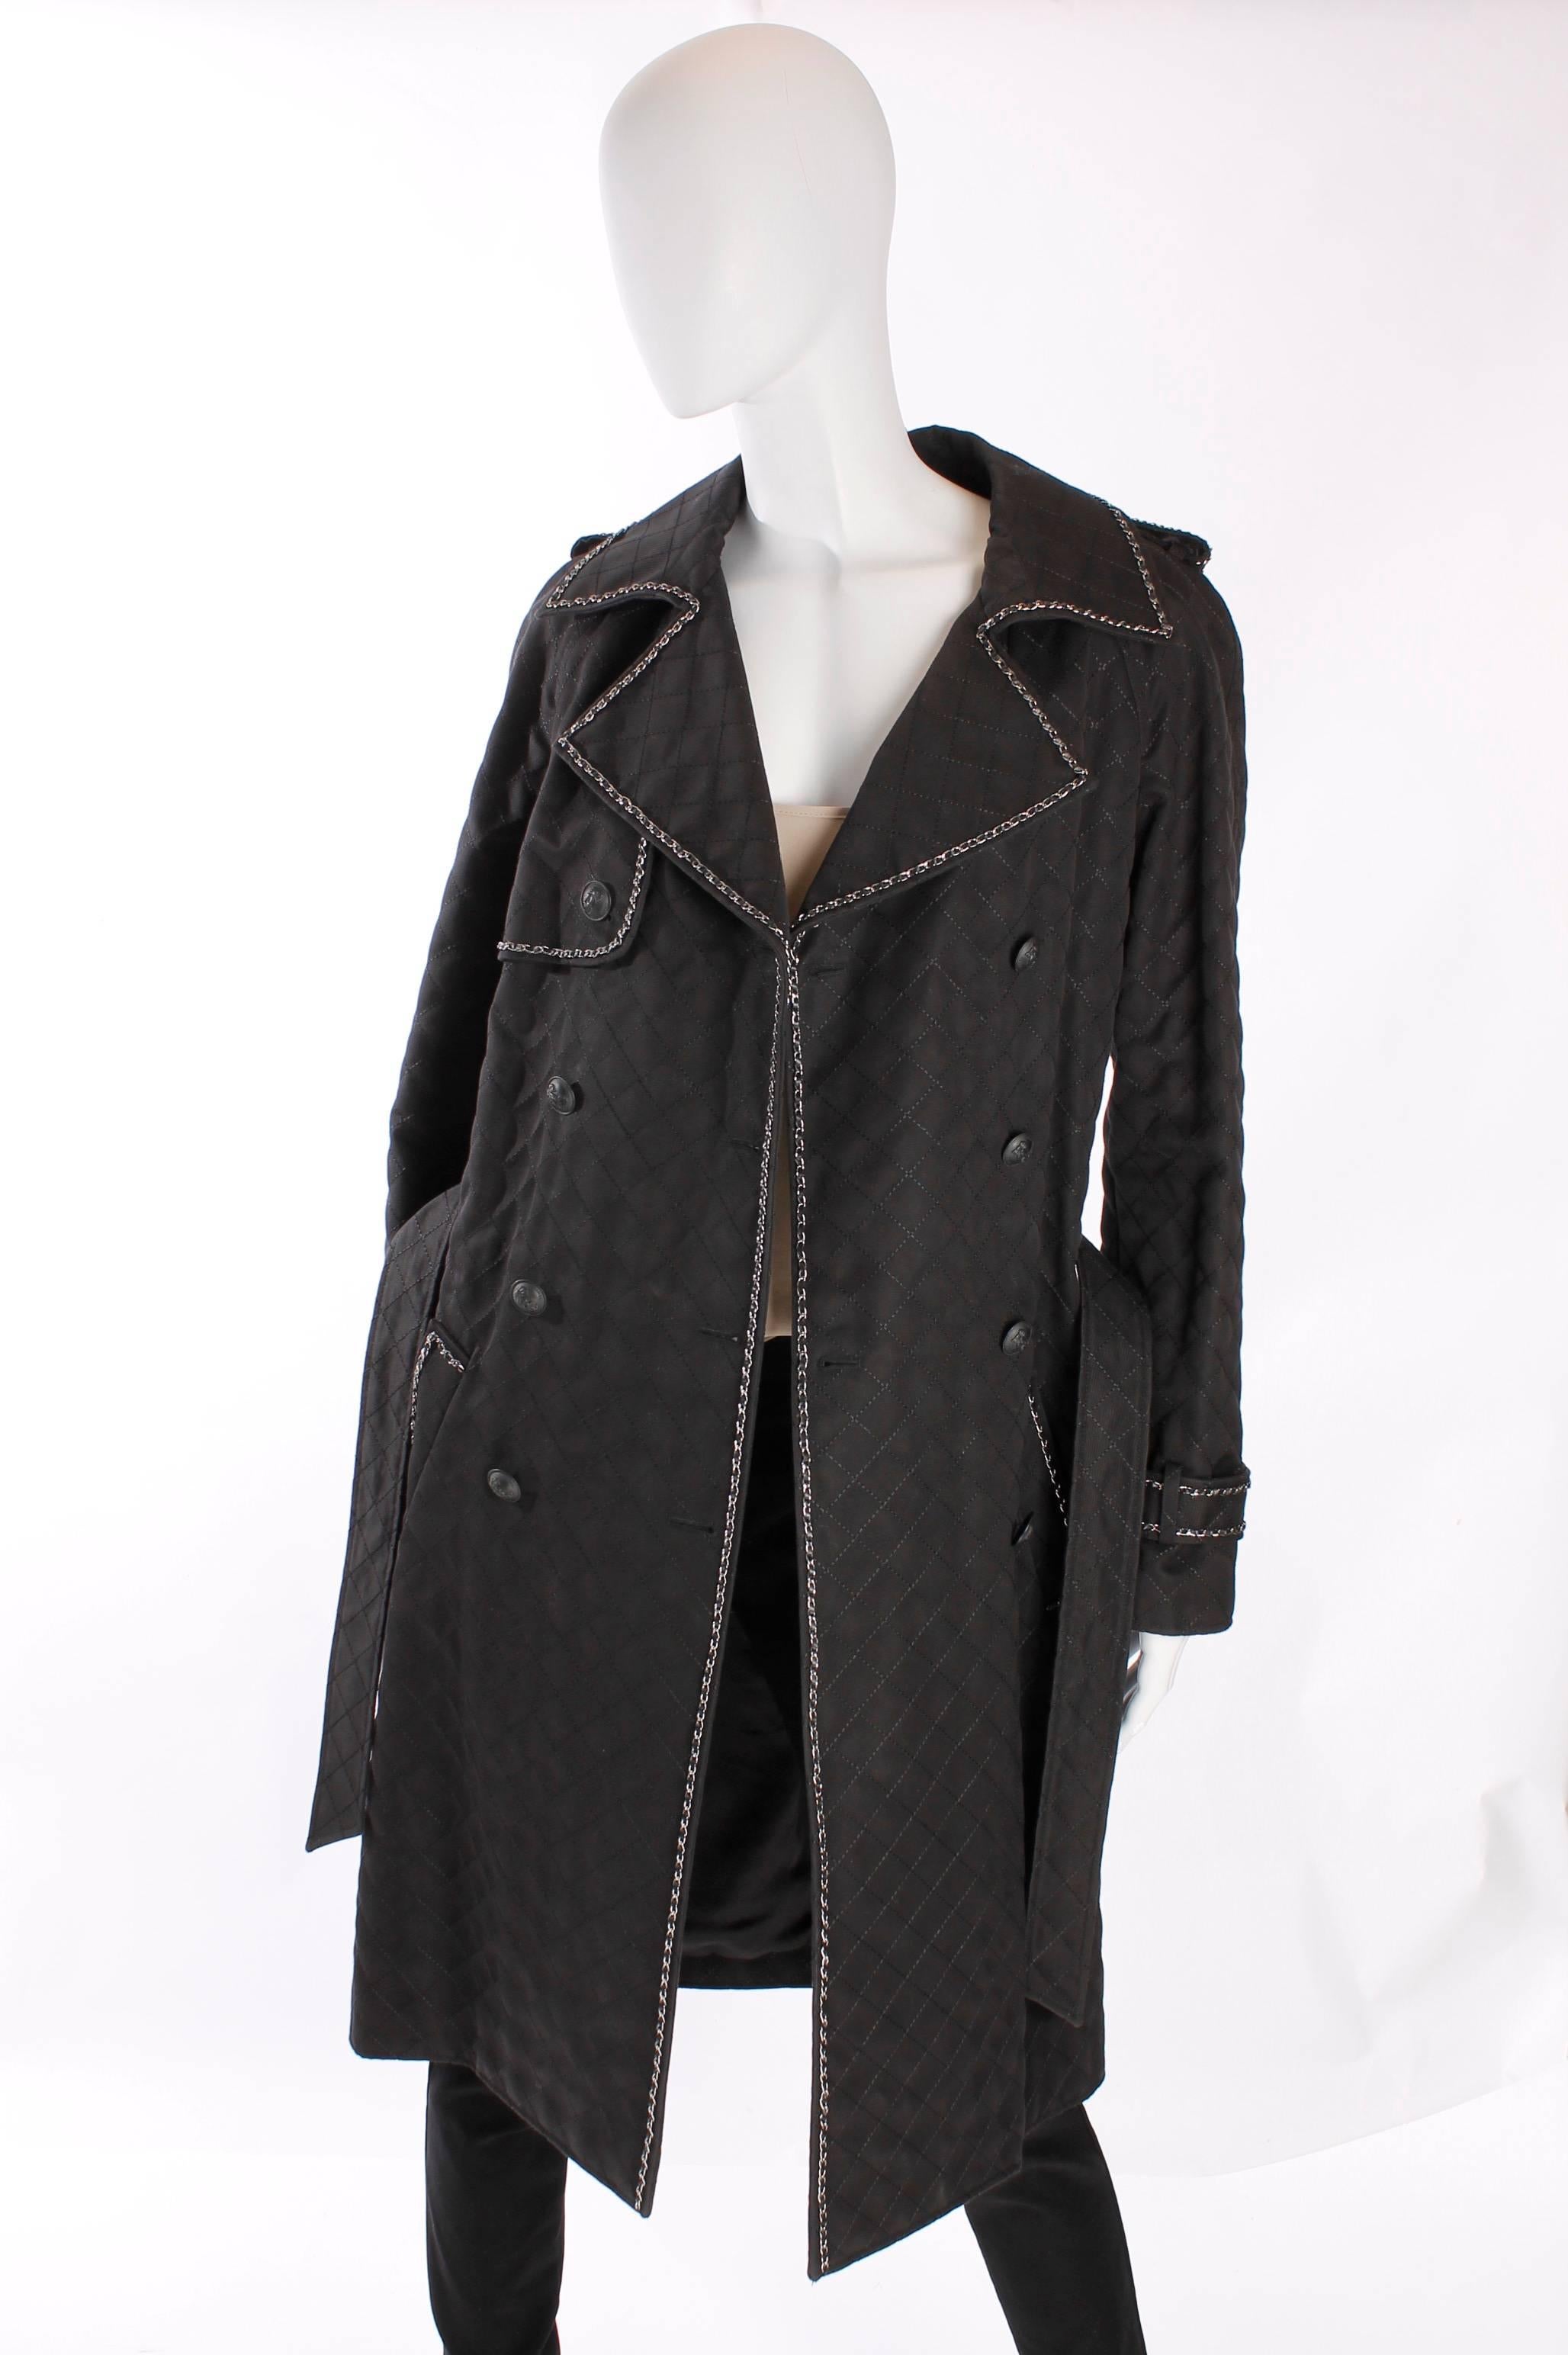 Insanely beautiful trenchcoat by Chanel, wow!!

This fully quilted coat has a large collar and lapel. Along the sides a silver chain with black leather is attached. It looks just like the shoulderstrap of the 2.55 Chanel bag! This chain is also to